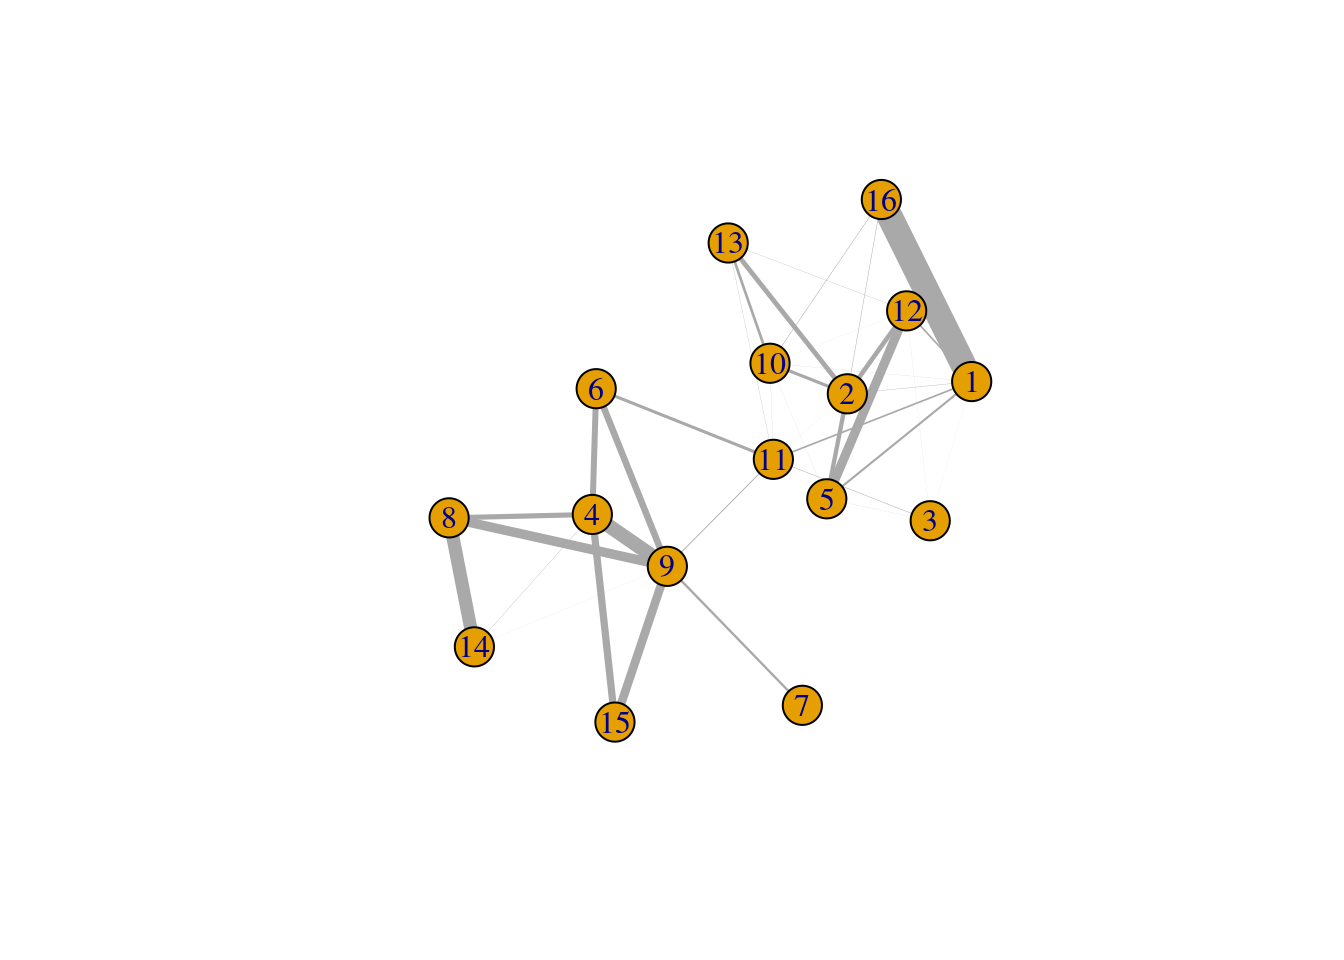 Force-based layout showing the relationships between clusters based on the log-ratio of observed to expected total weights between nodes in different clusters. The thickness of the edge between a pair of clusters is proportional to the corresponding log-ratio.